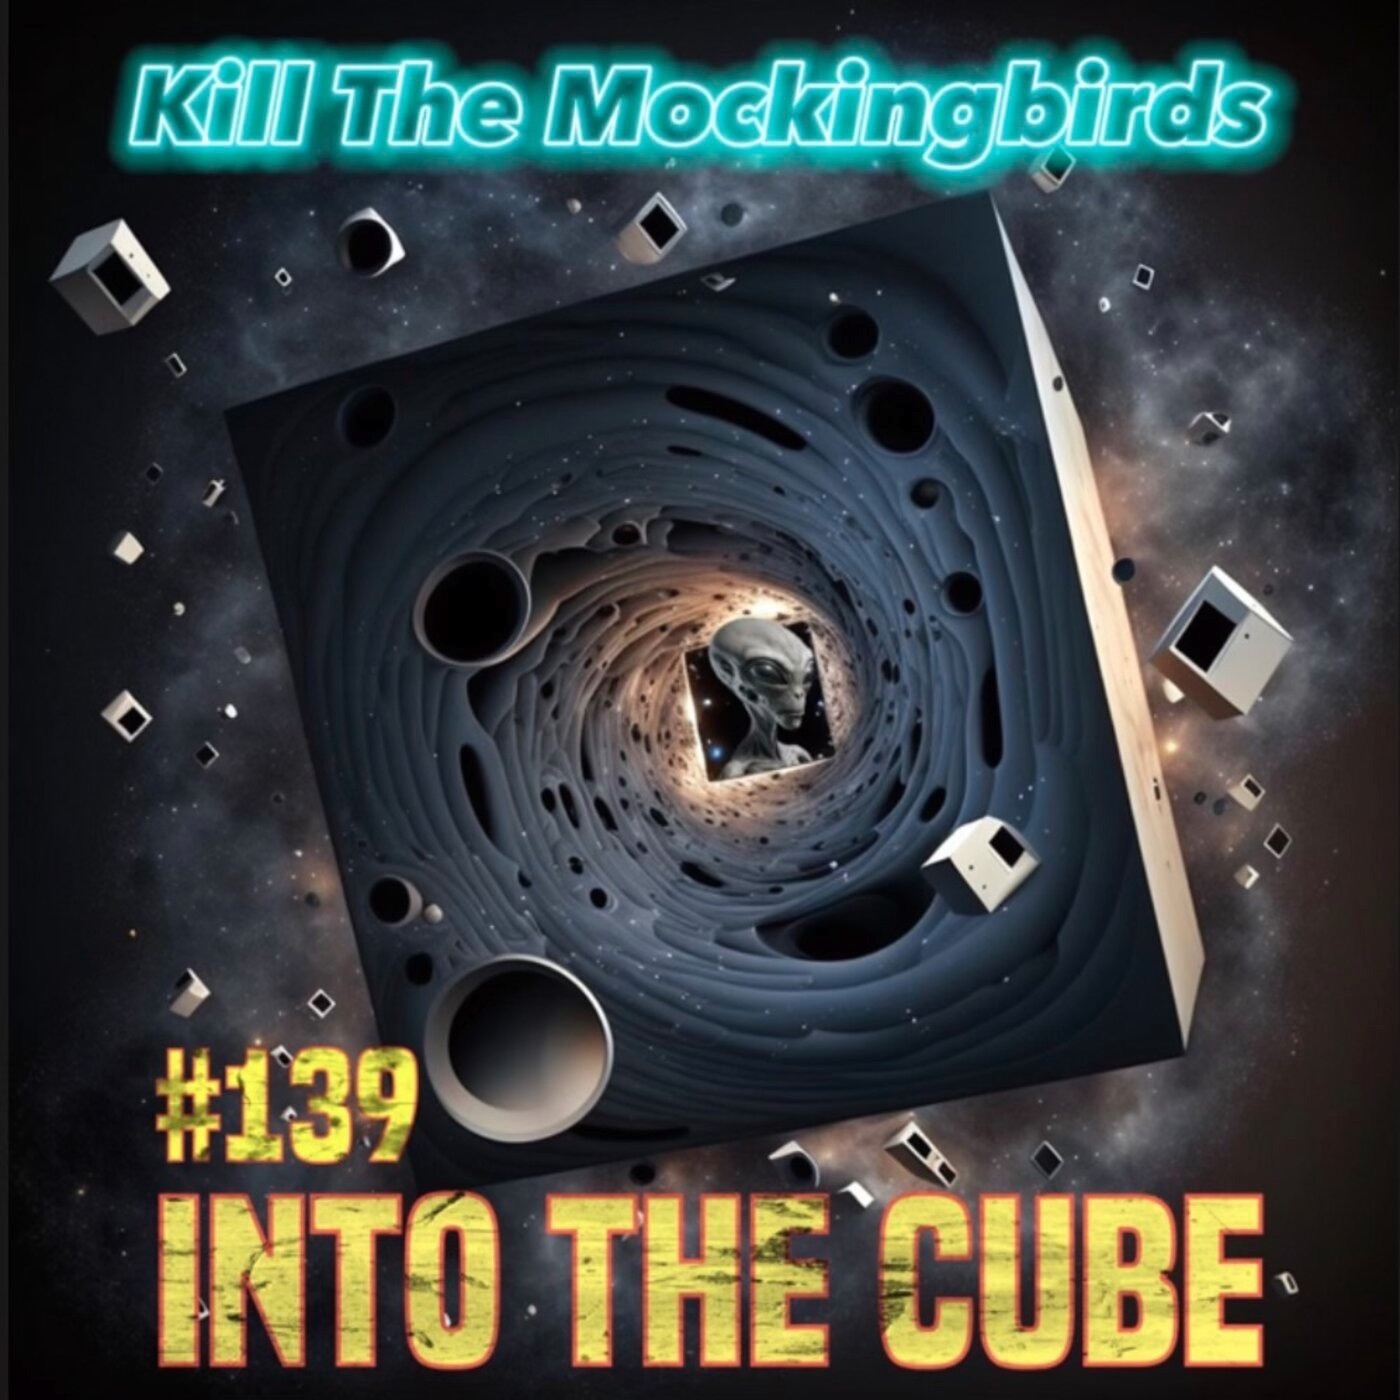 #139 “INTO THE CUBE” w/ The Cryptid Huntress